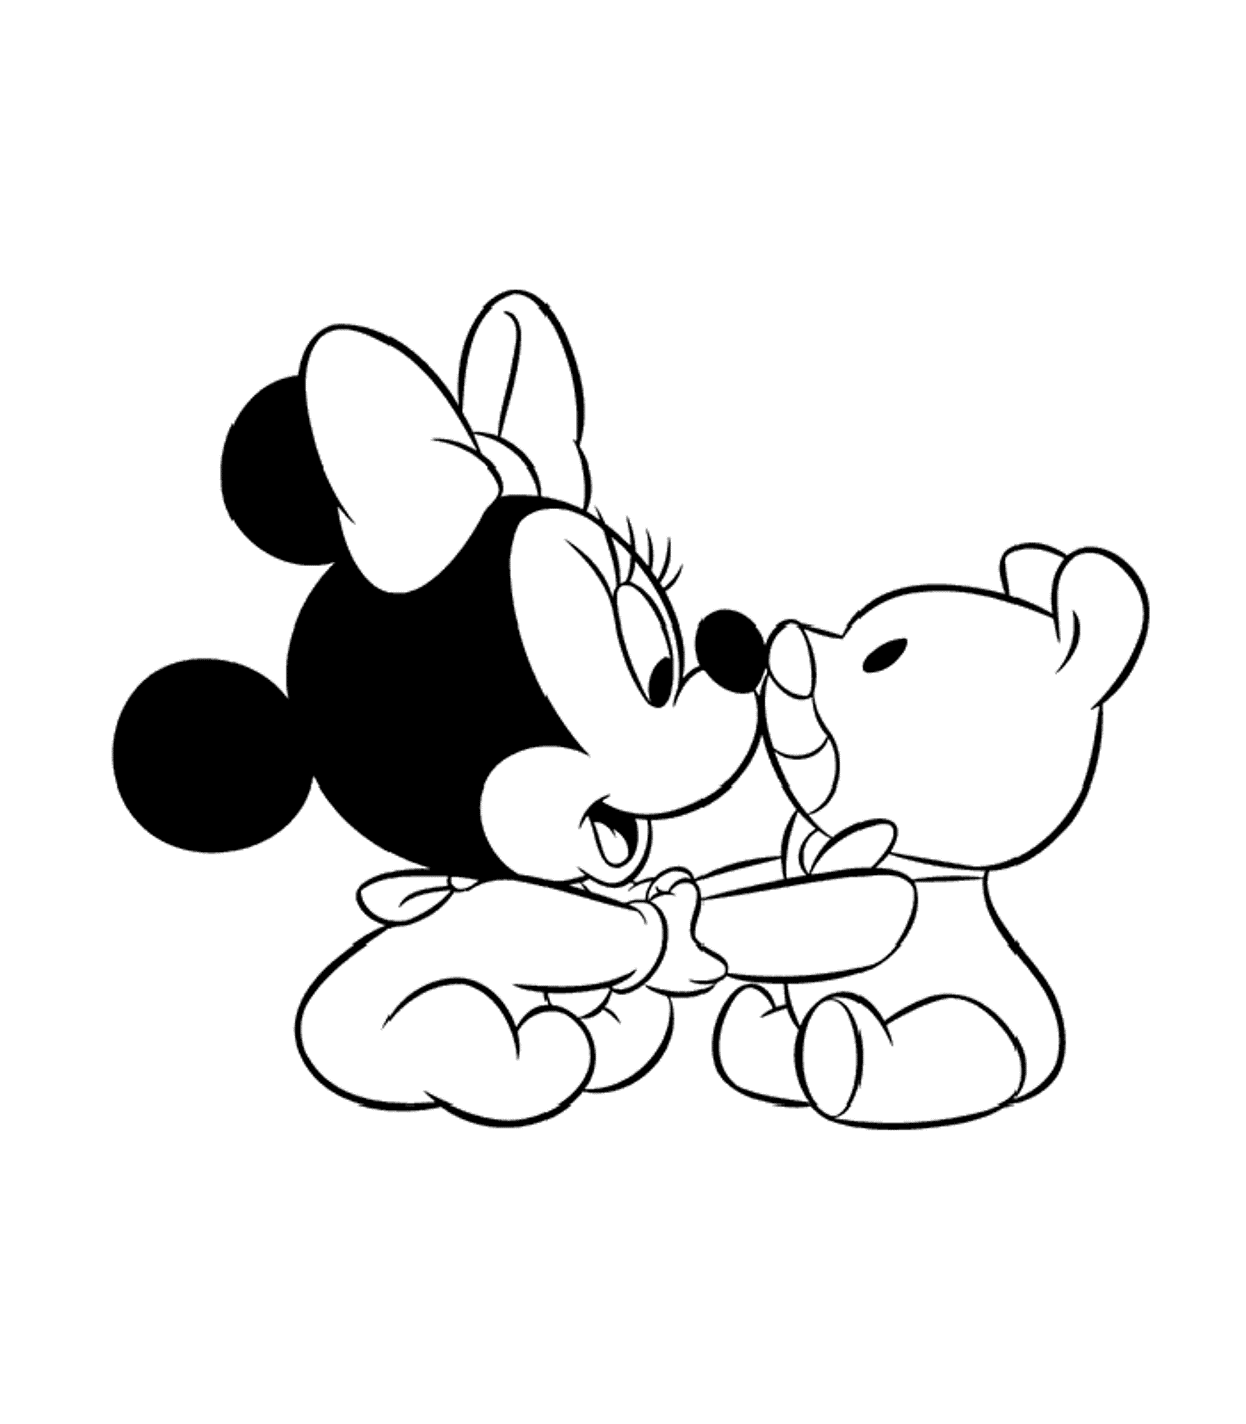 Baby Minnie Mouse Coloring Pages - SheetalColor.com